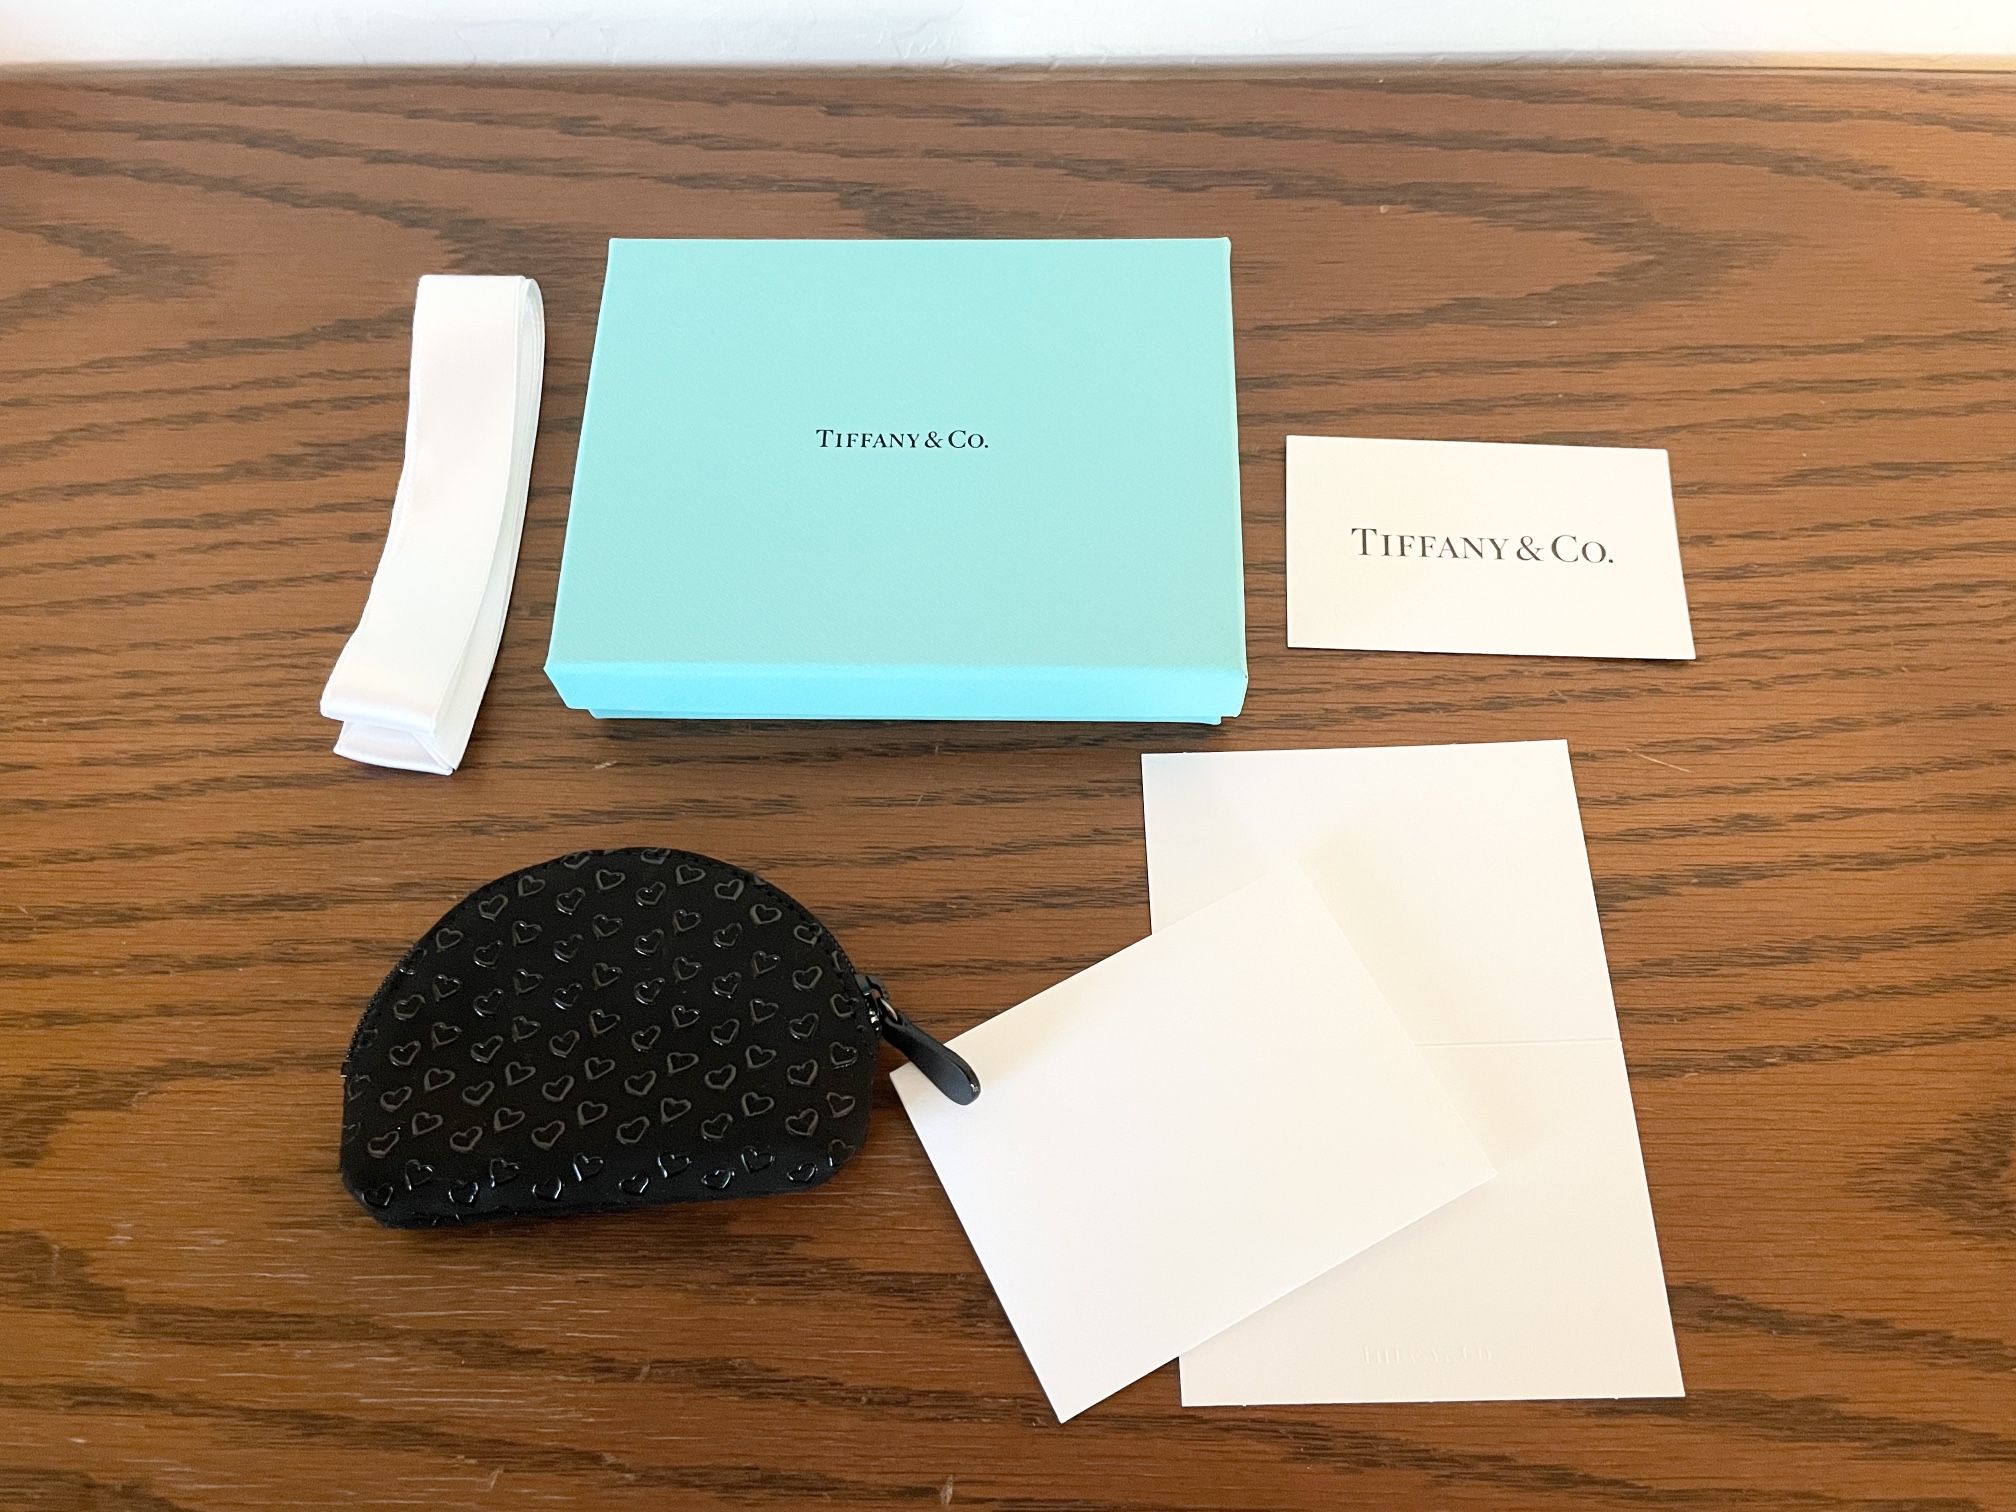 Tiffany & Co. Elsa Peretti Mini Zip Pouch in black leather with lacquered Open Hearts with Box, Ribbon, and Card